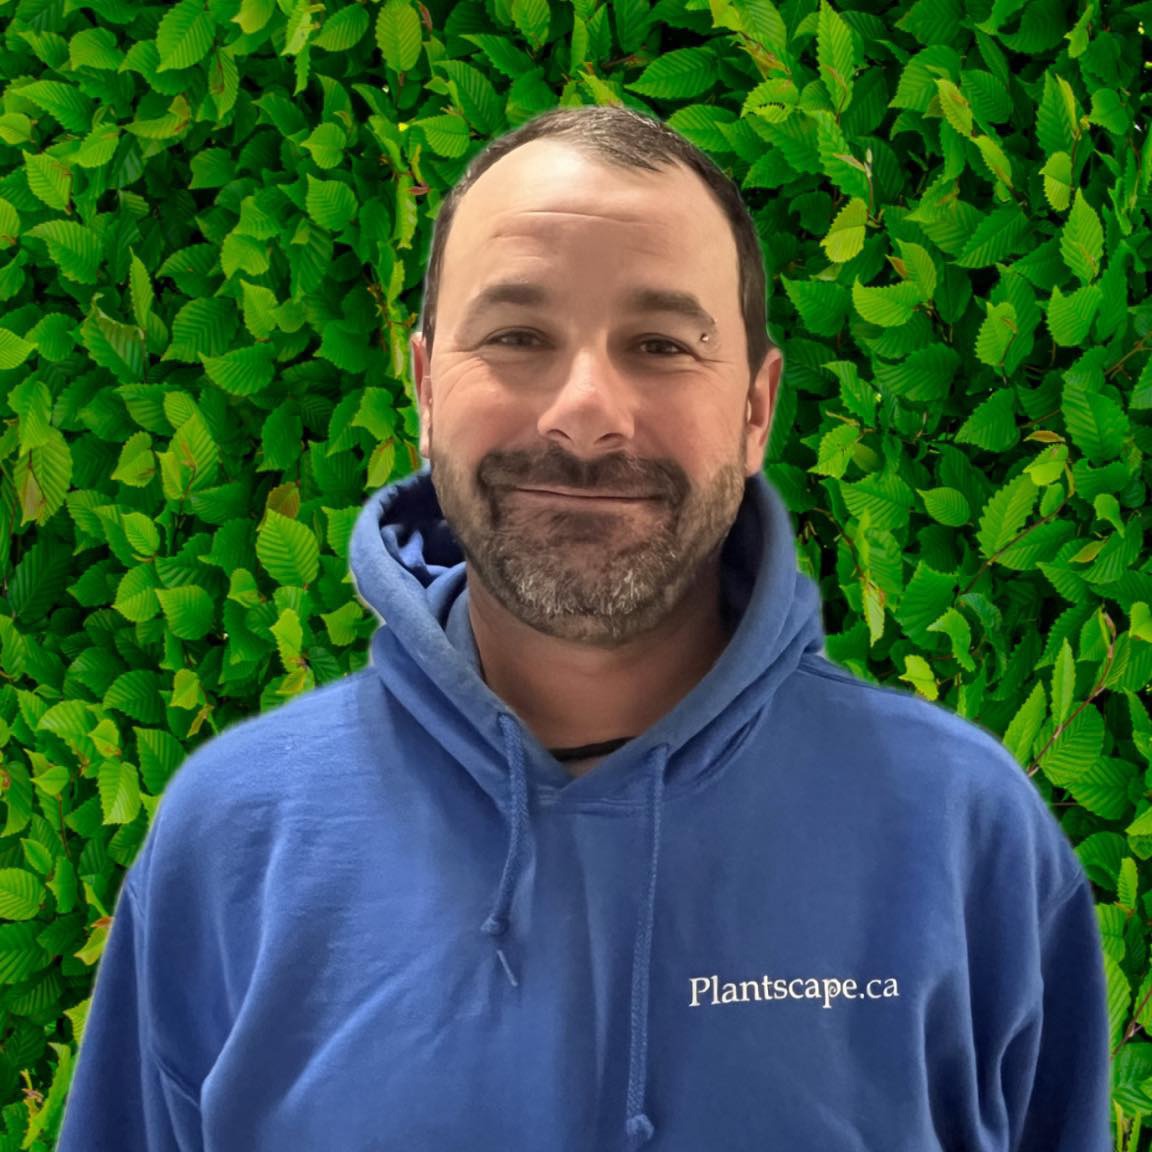 A smiling person in a blue hoodie stands in front of a leafy green backdrop. The hoodie has "Plantscape.ca" written on it.